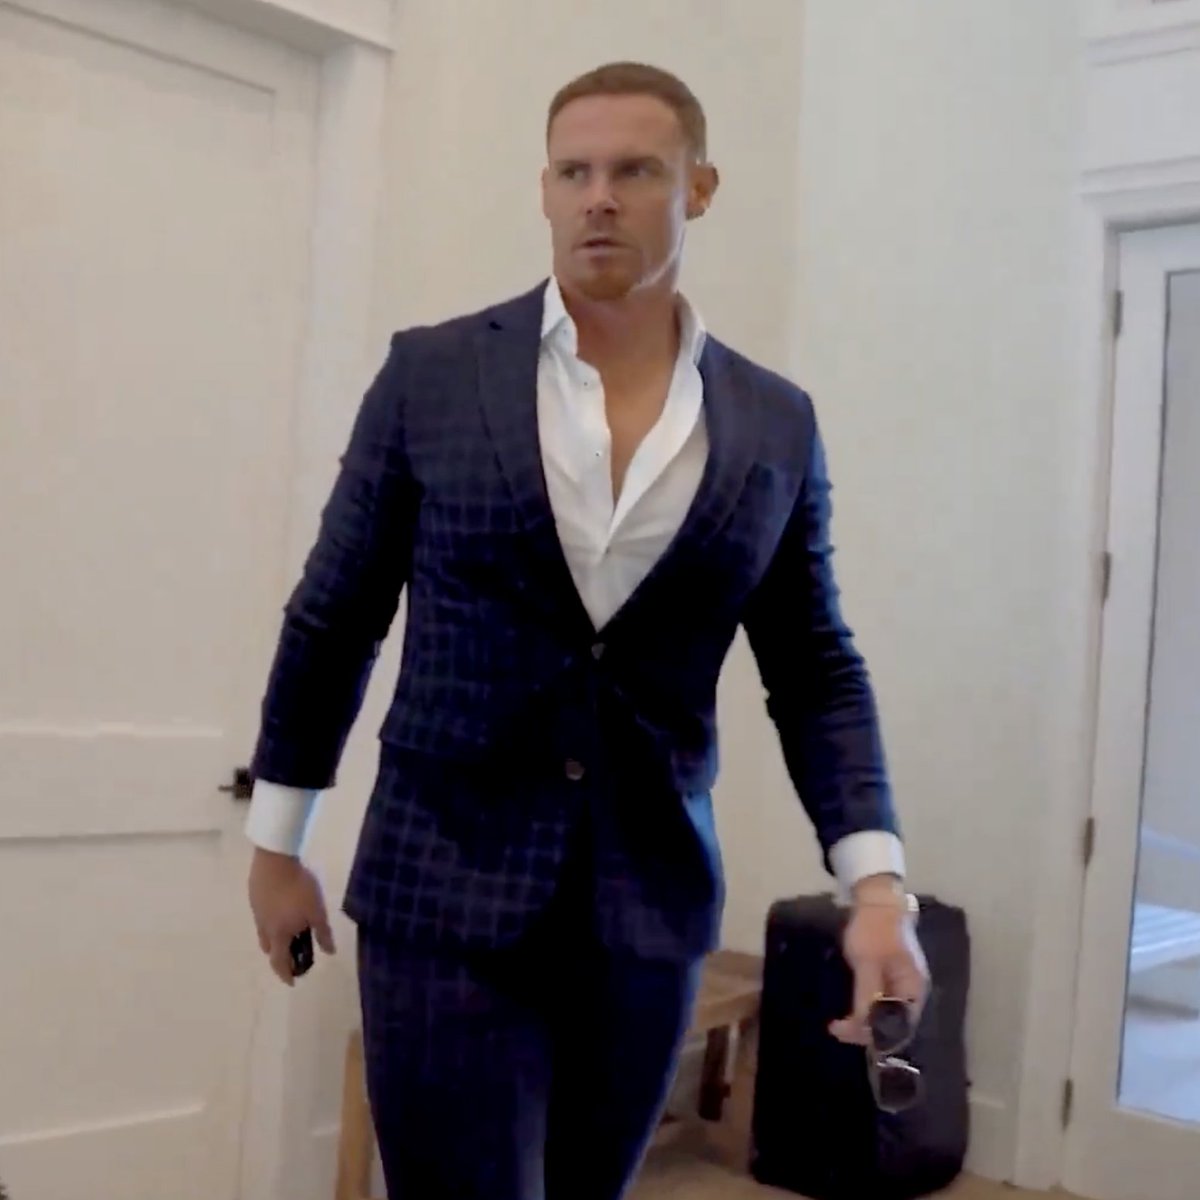 i dont understand how this is the alpha male look nowadays. if these clothes were any tighter, they'd be inside him